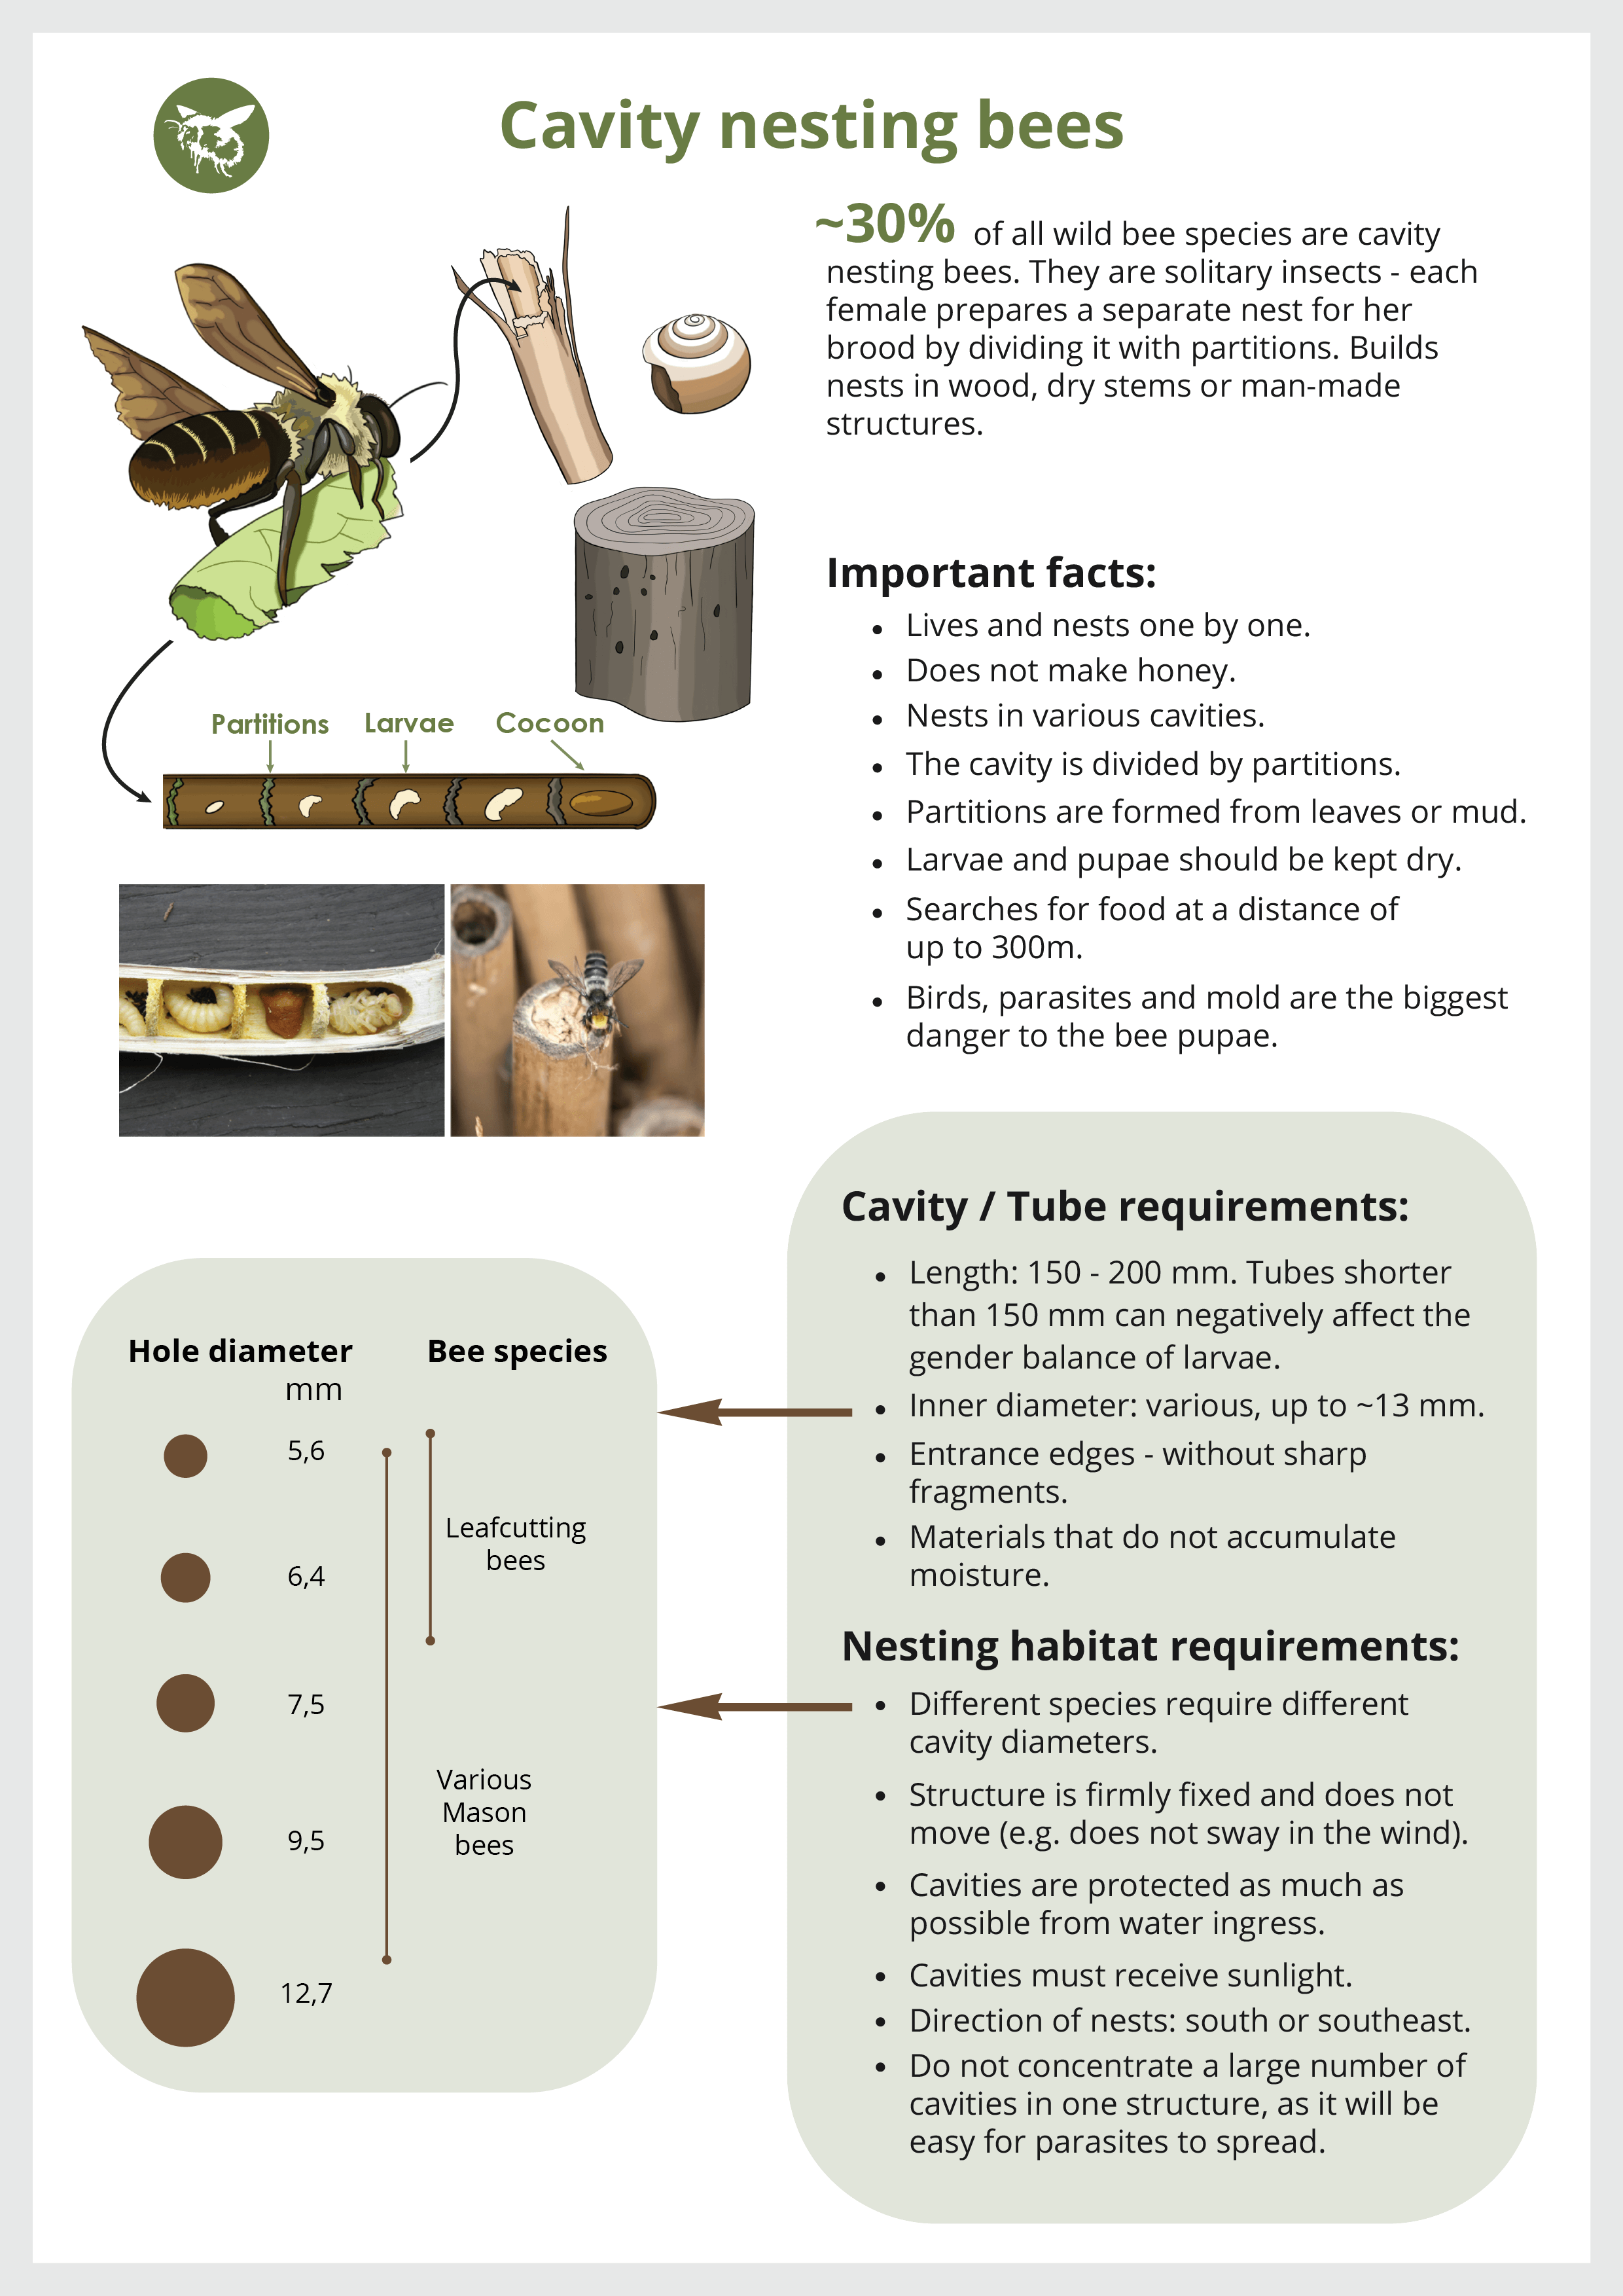 Memo for the participants about cavity nesting bees